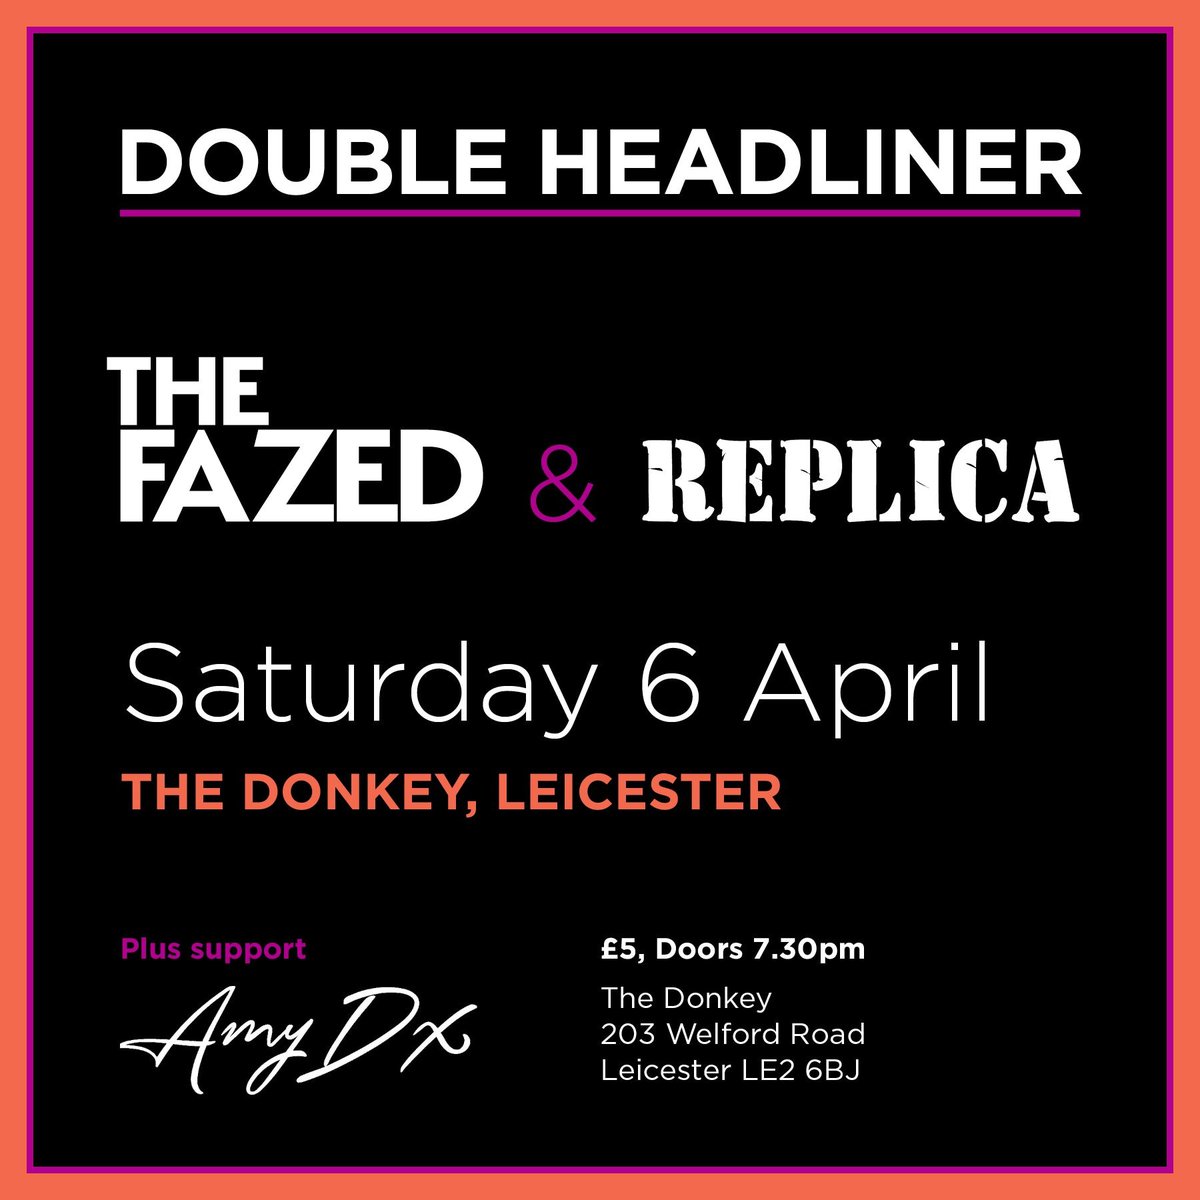 2 WEEKS TODAY 👊 - The Fazed & Replica double headliner at The Donkey Venue plus support from the fabulous Amy Dx - just £5 entry on the door #livemusic #indieMusic